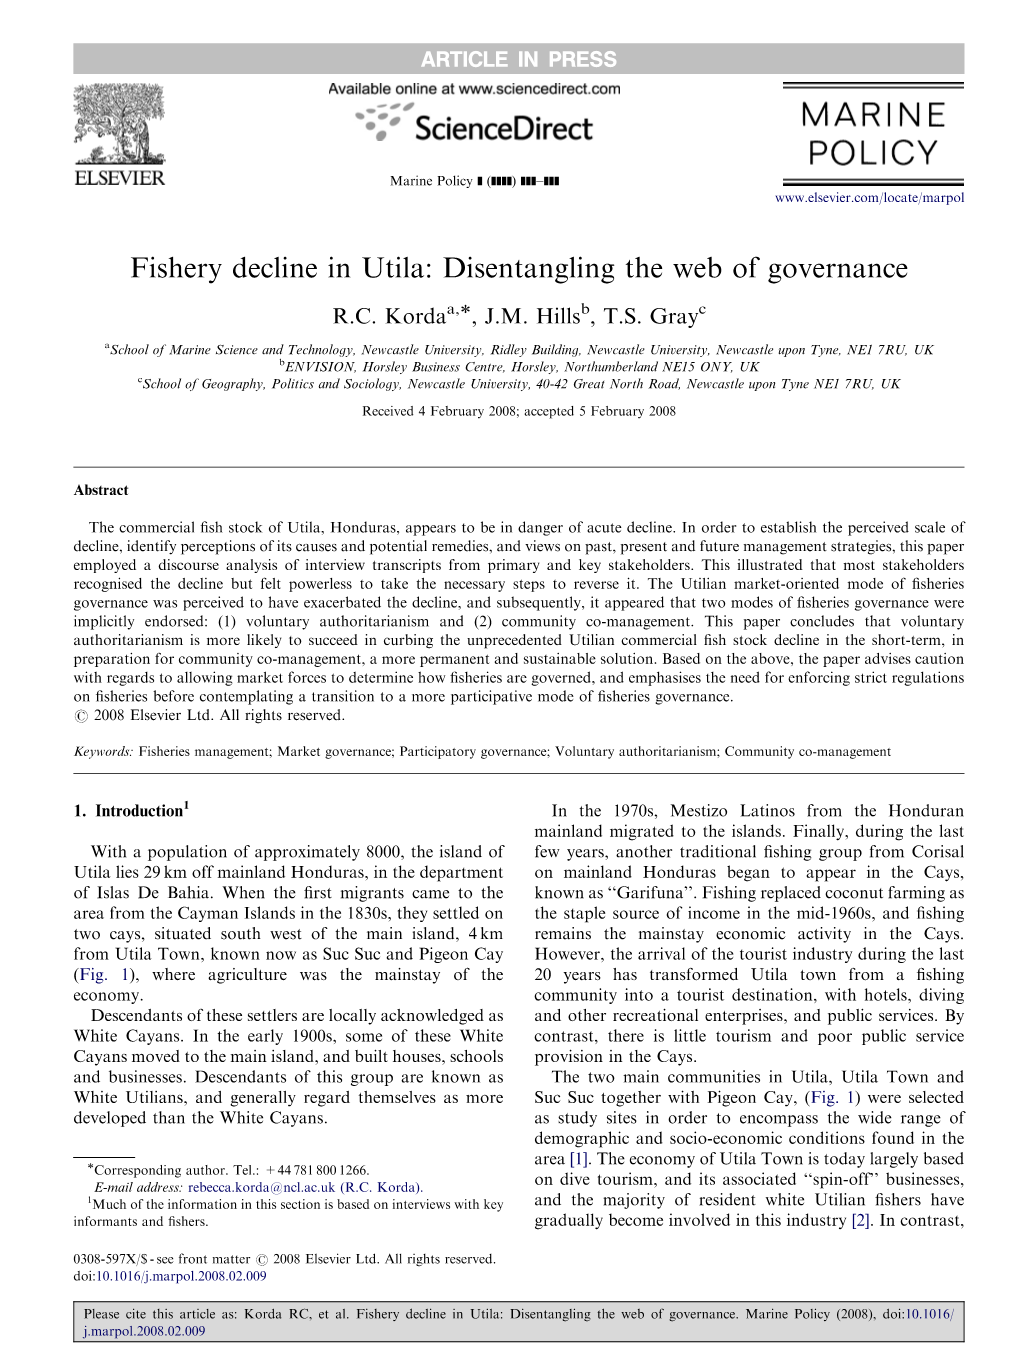 Fishery Decline in Utila: Disentangling the Web of Governance